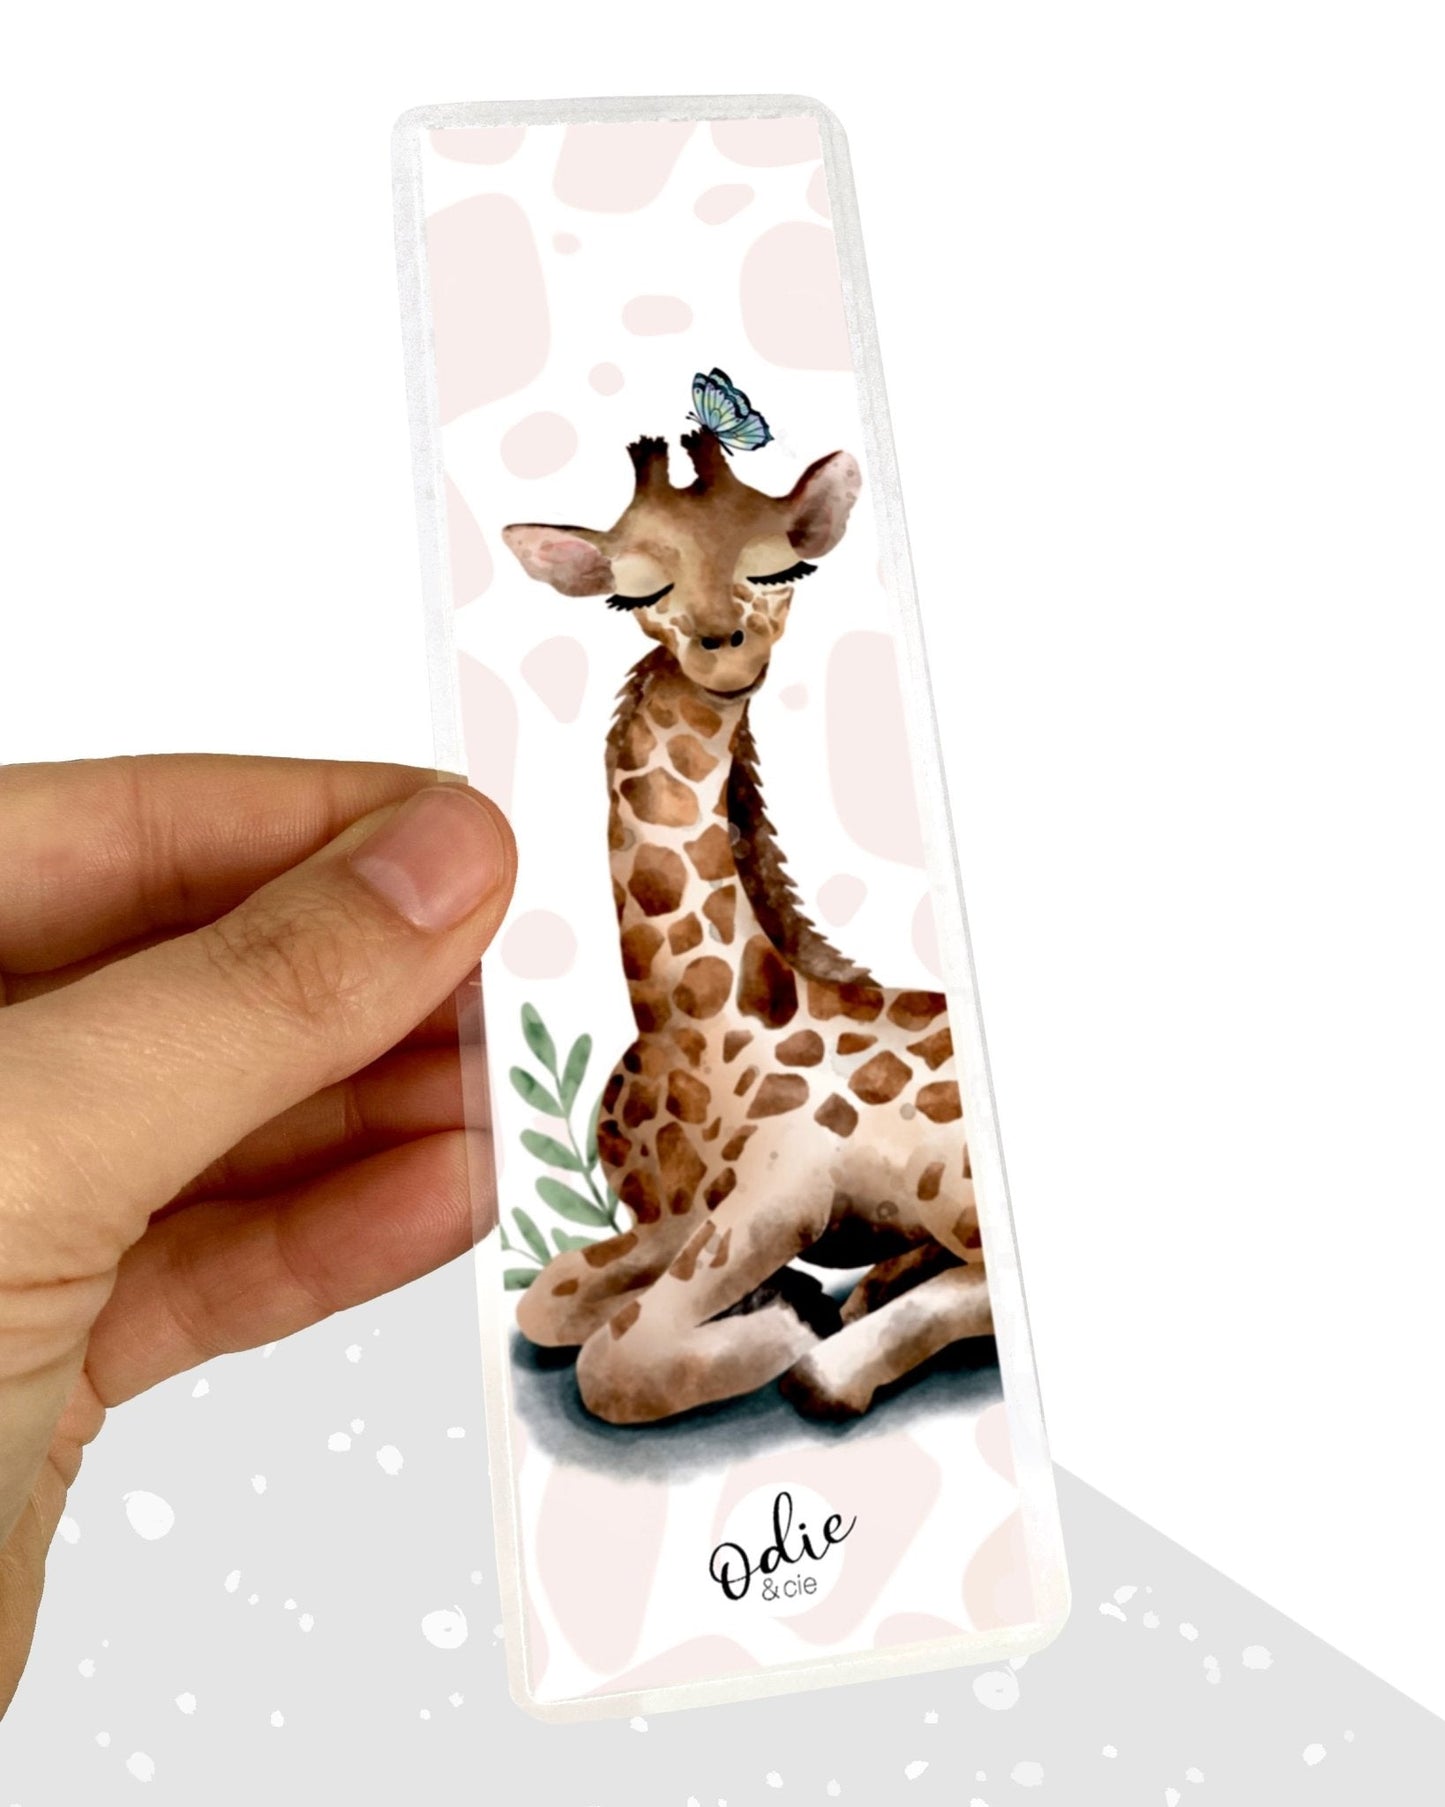 Signet - Girafe - Signet - Créations Odie